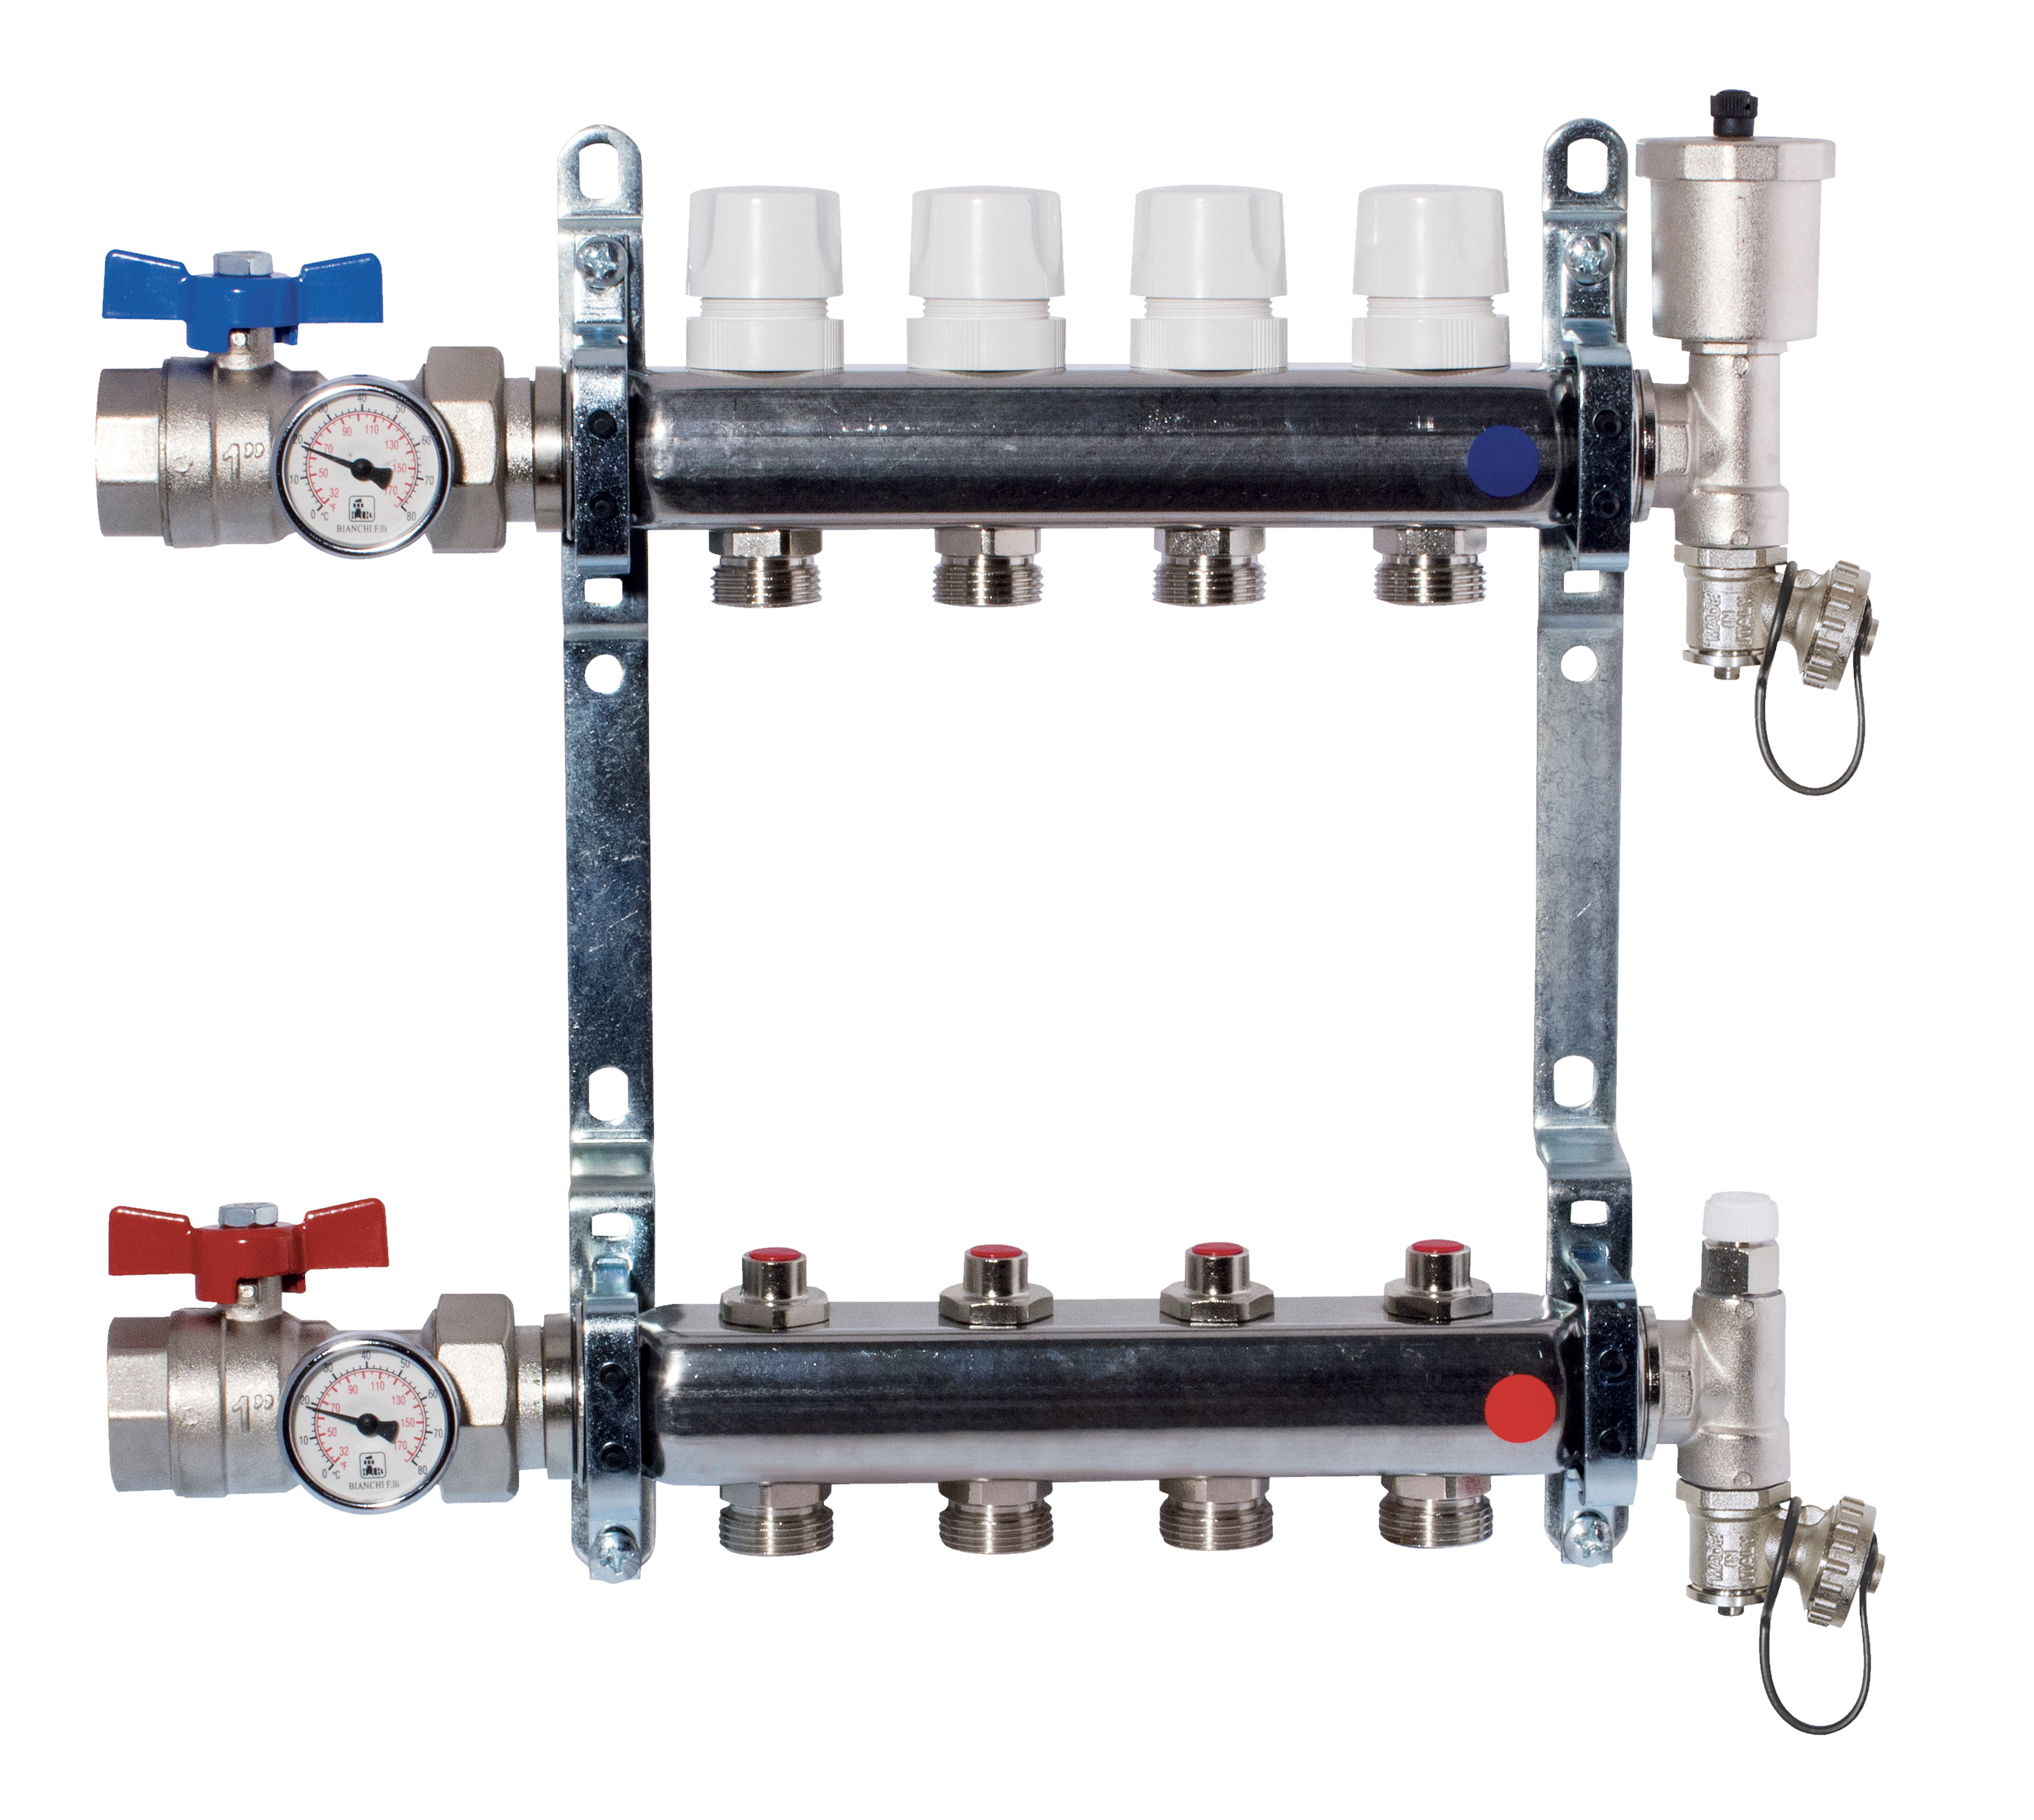 FF manifolds therm. valves and lockshield, valves, discharge %>